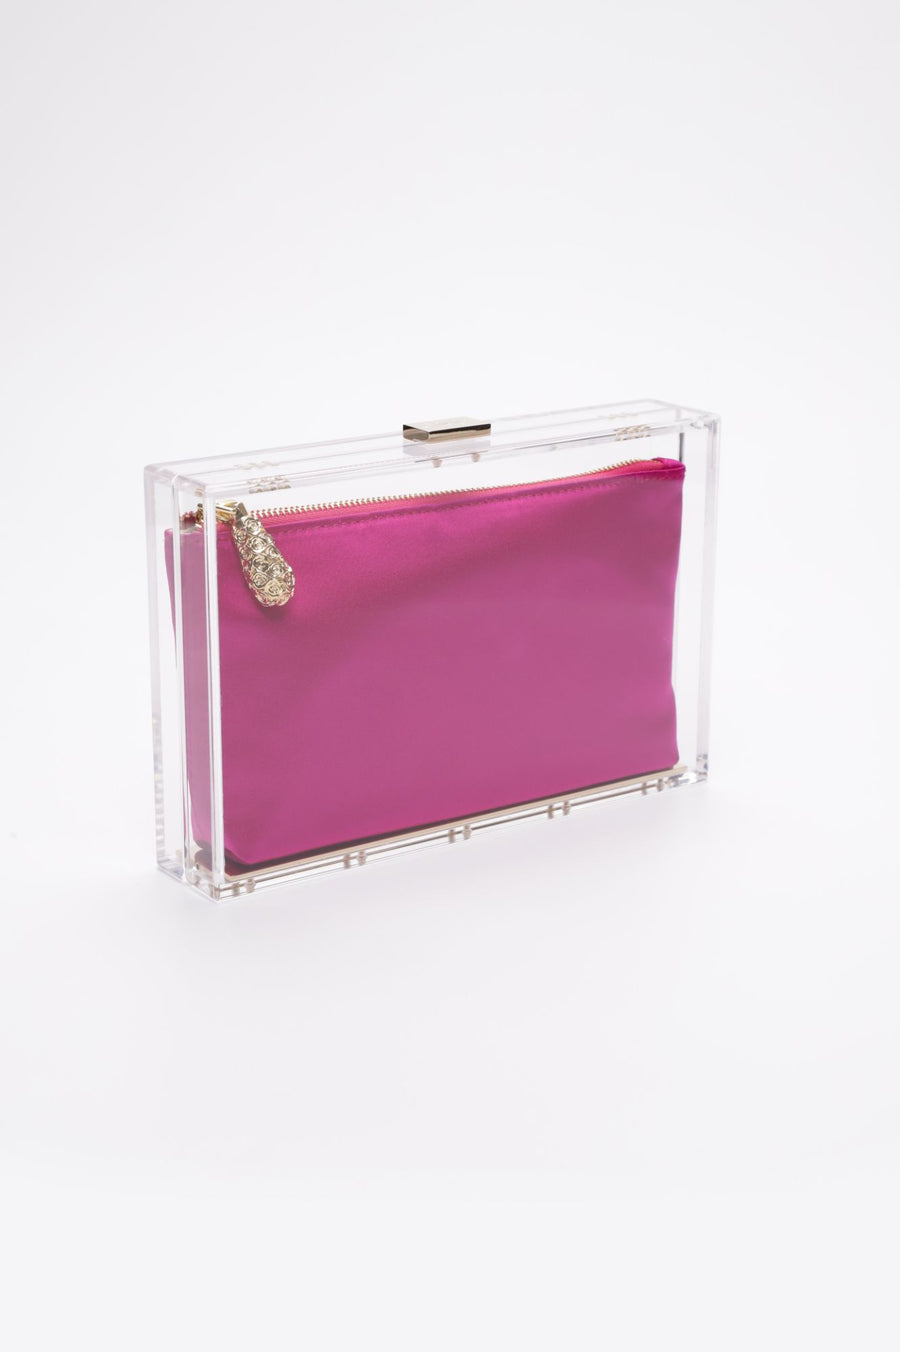 Side angle of the Mia Clutch with clear acrylic rectangle body with a hot pink satin interior pouch.